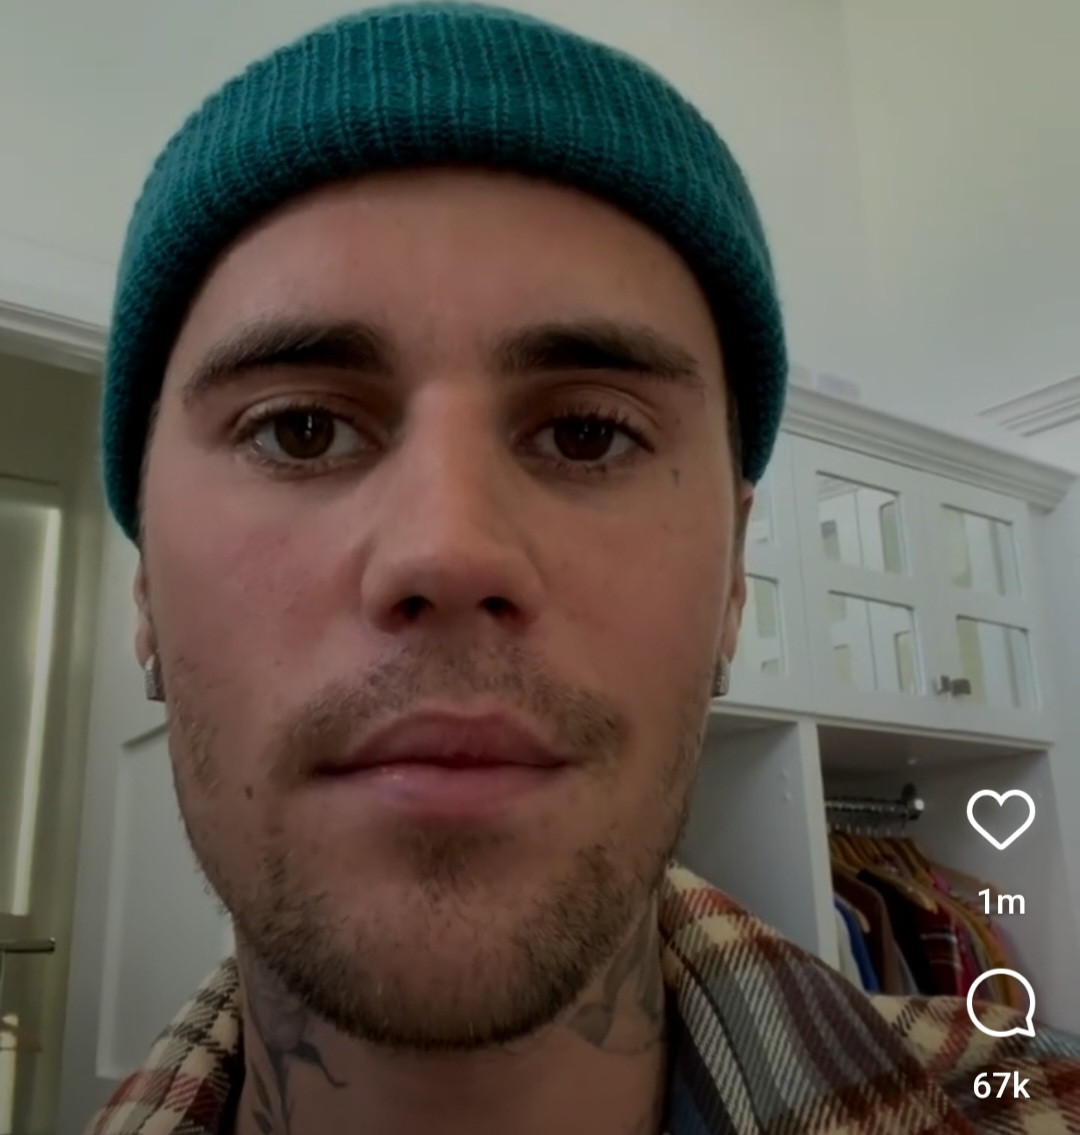 Justin Bieber Reveals He’s Been Diagnosed with Ramsay Hunt Syndrome Causing Half of His Face to be Paralysed (video)